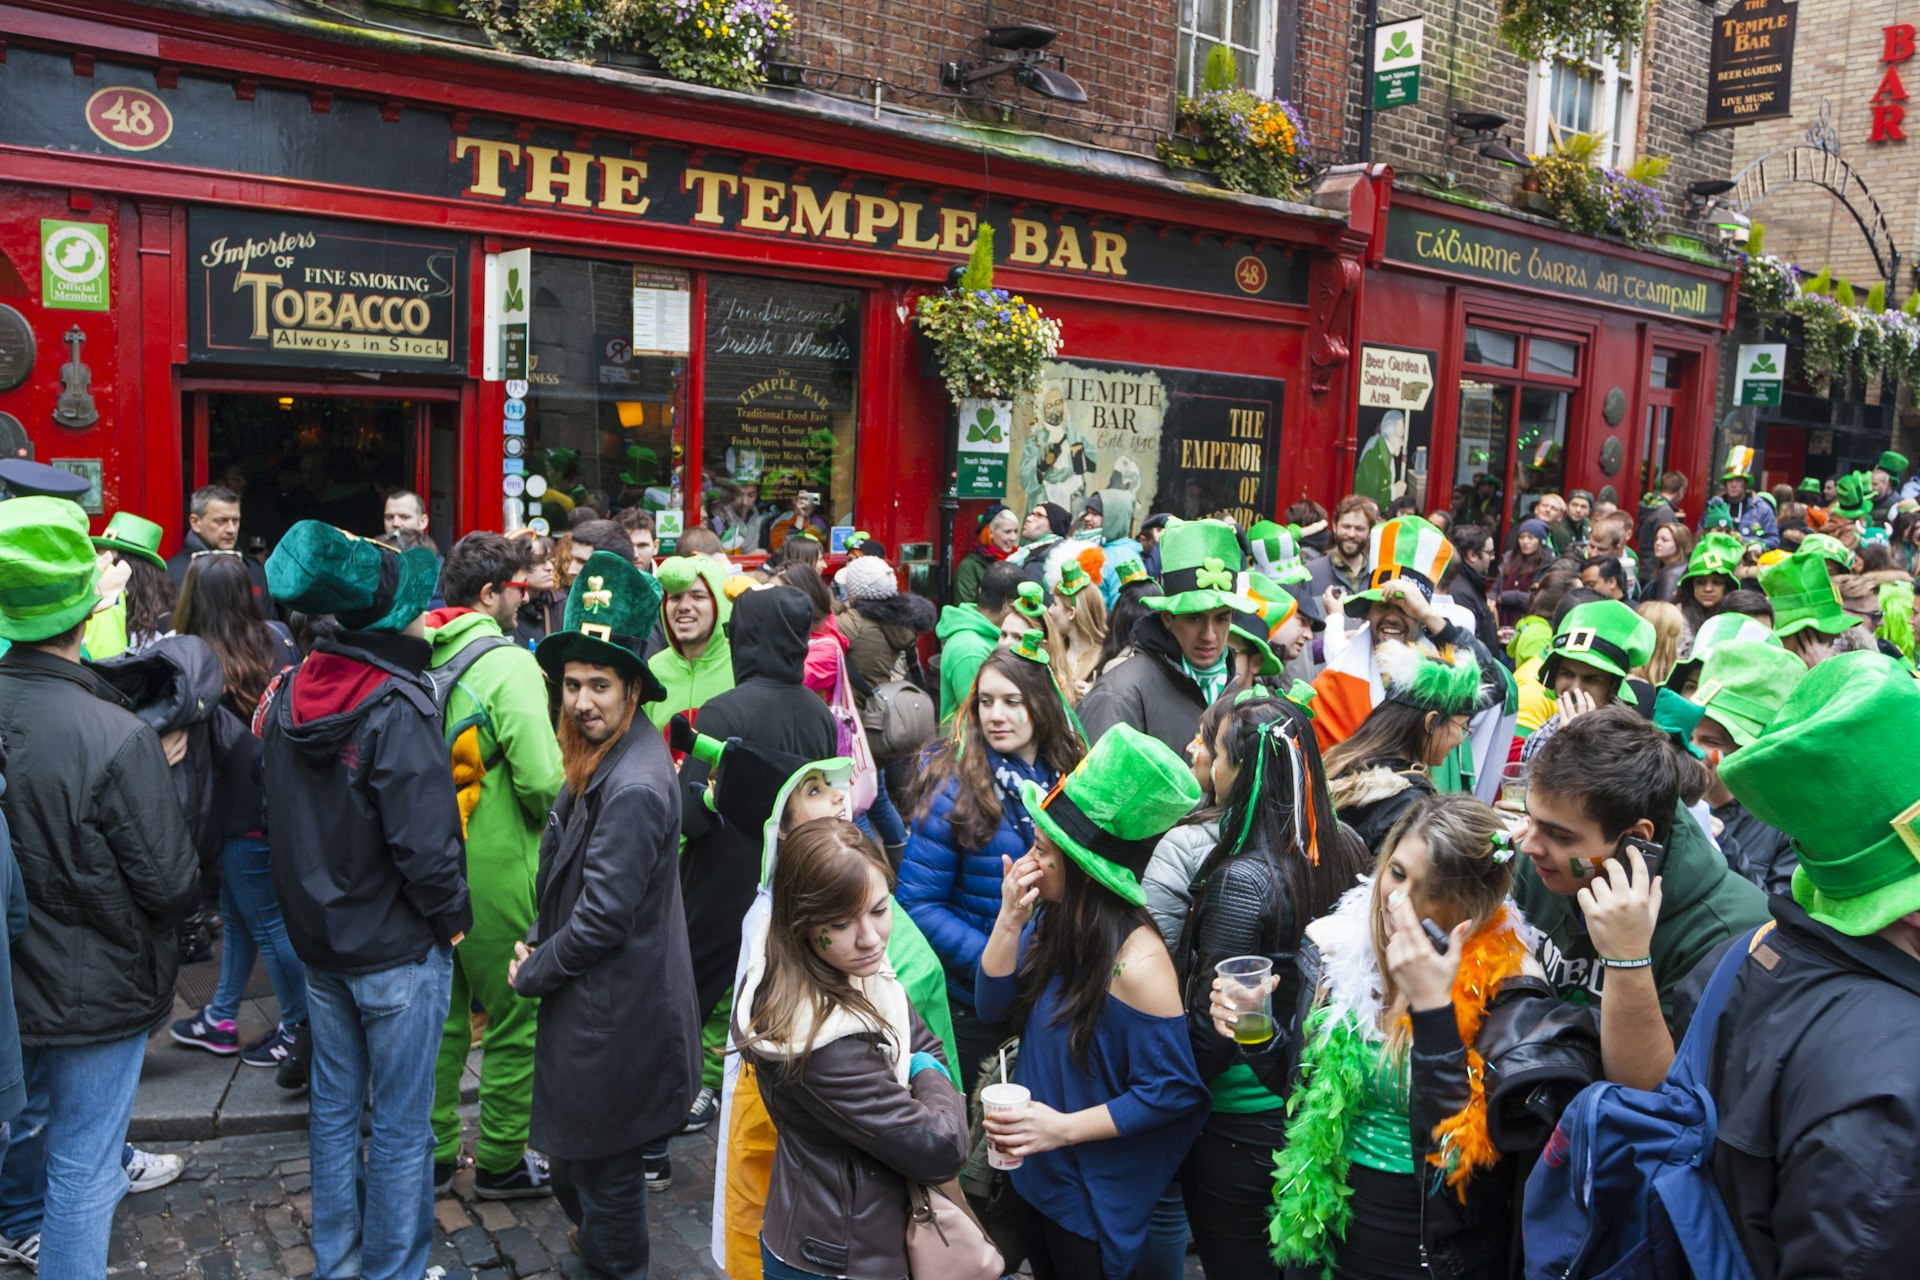 St Patrick's Day parade in Dublin Ireland on March 17, 2014: People dress up Saint Patrick's at The Temple Bar